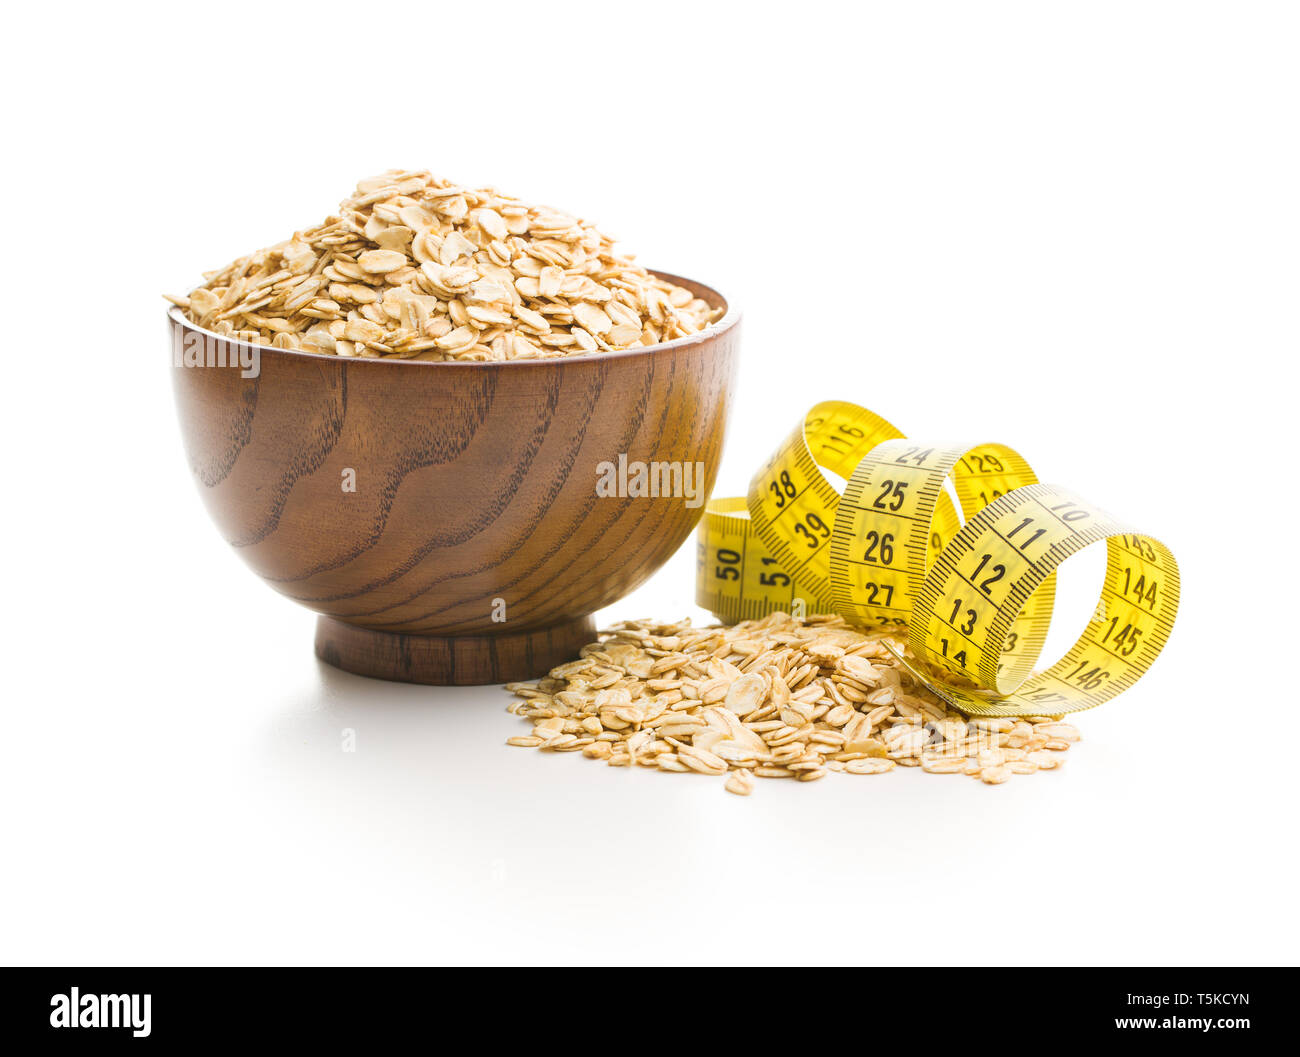 Dry rolled oatmeal and measuring tape isolated on white background. Stock Photo